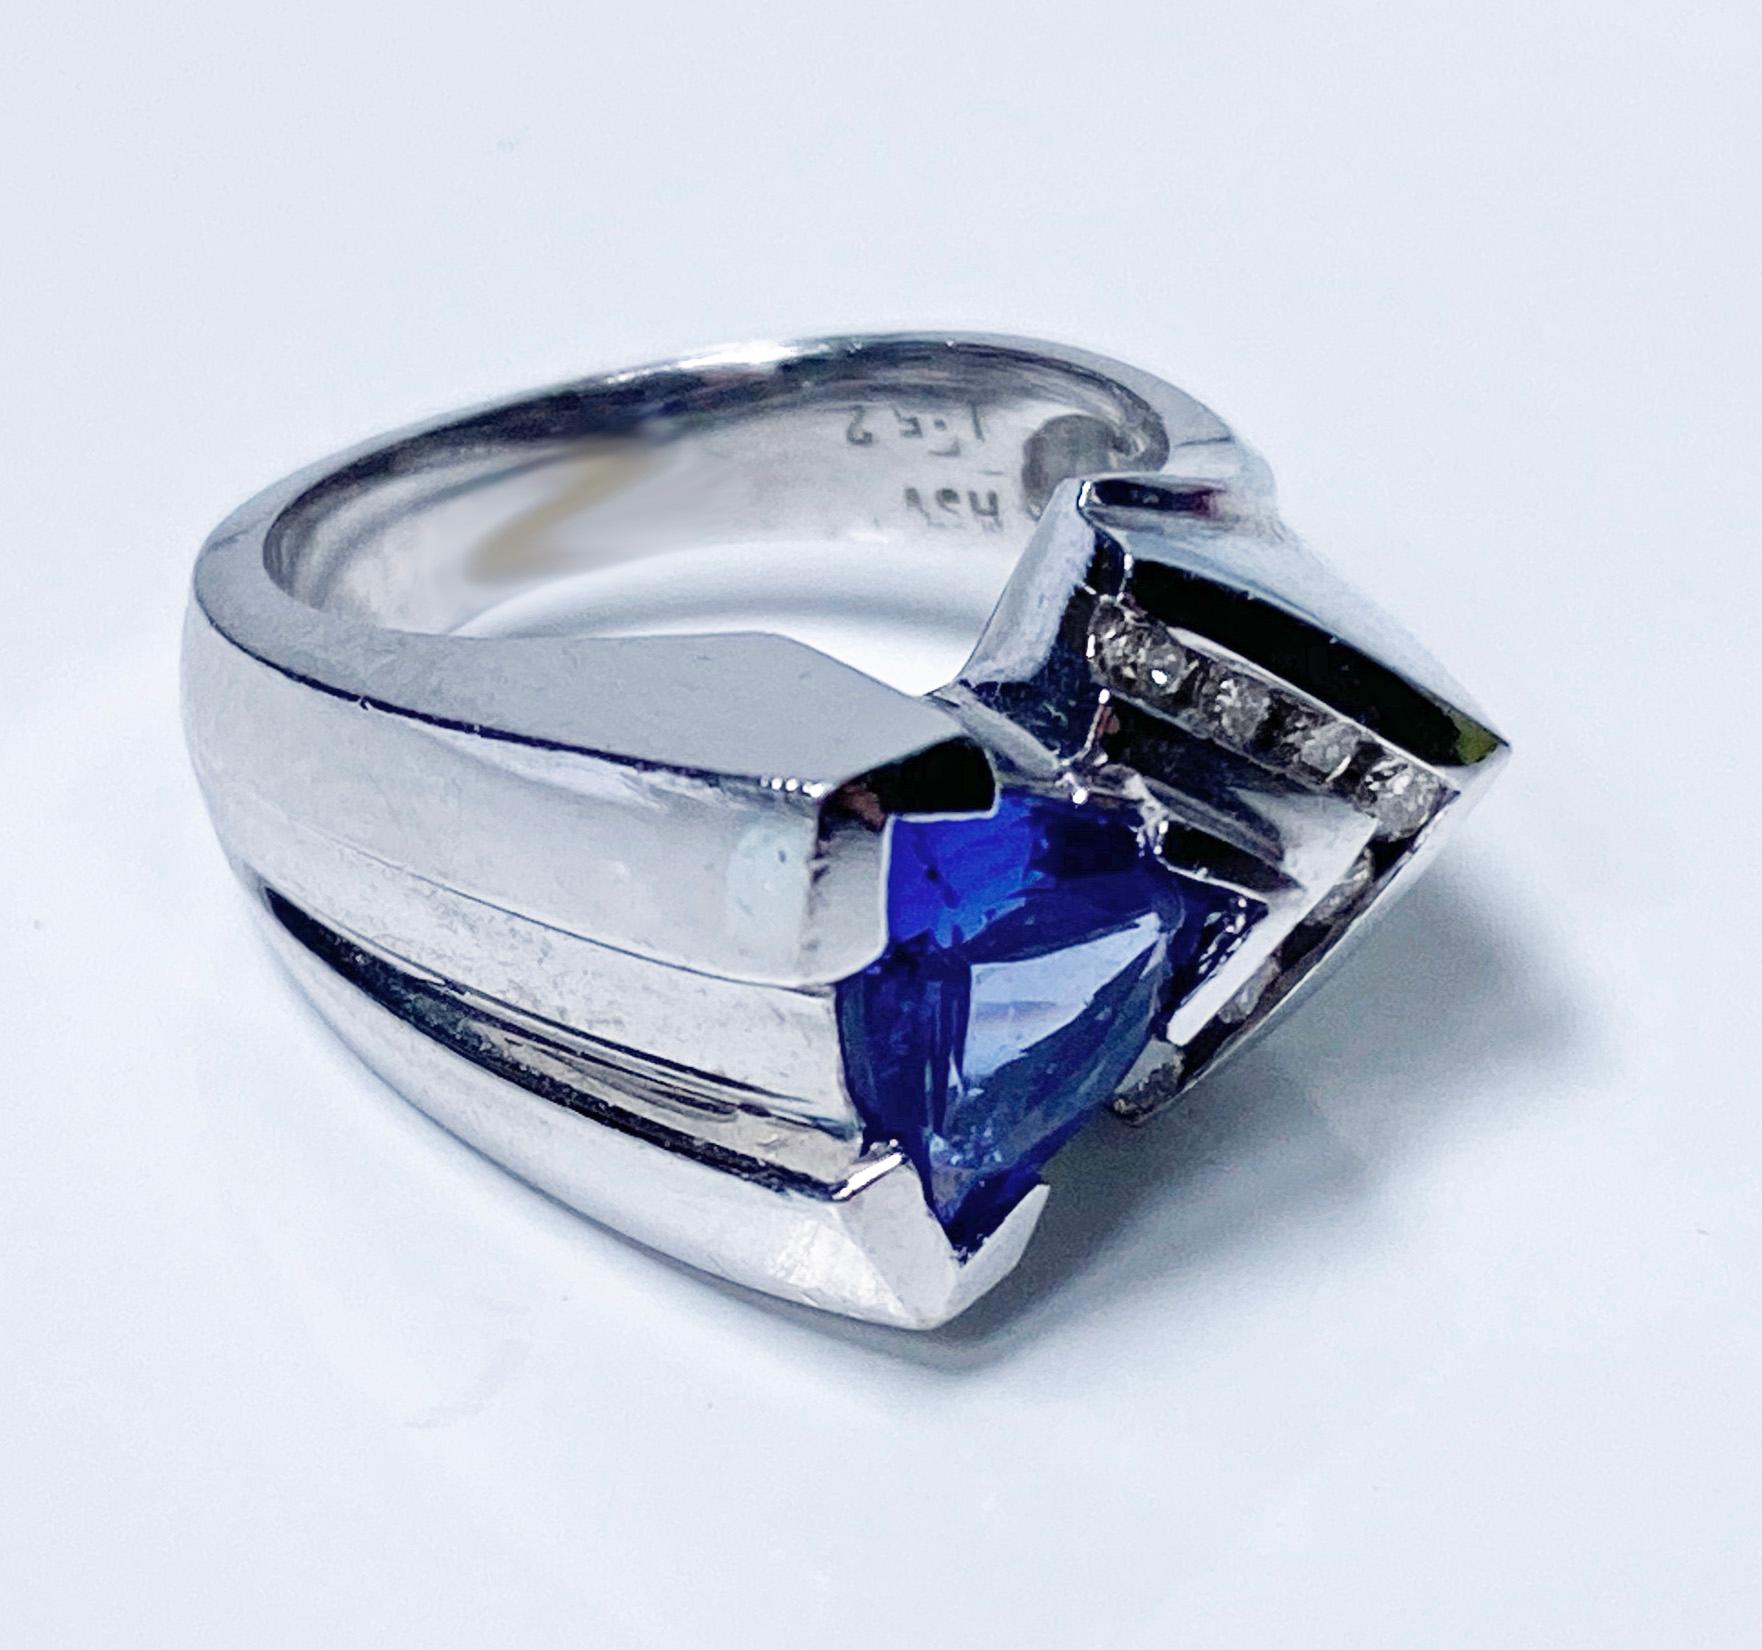 1970’s 14K White Gold Tanzanite Diamond Ring. The custom made Ring set with a trilliant intense Violet Blue very lightly included Tanzanite, approximately 1.55 cts, gauging 8.75 x 8.05 x 3.85 mm; and seven round brilliant cut Diamonds all in a